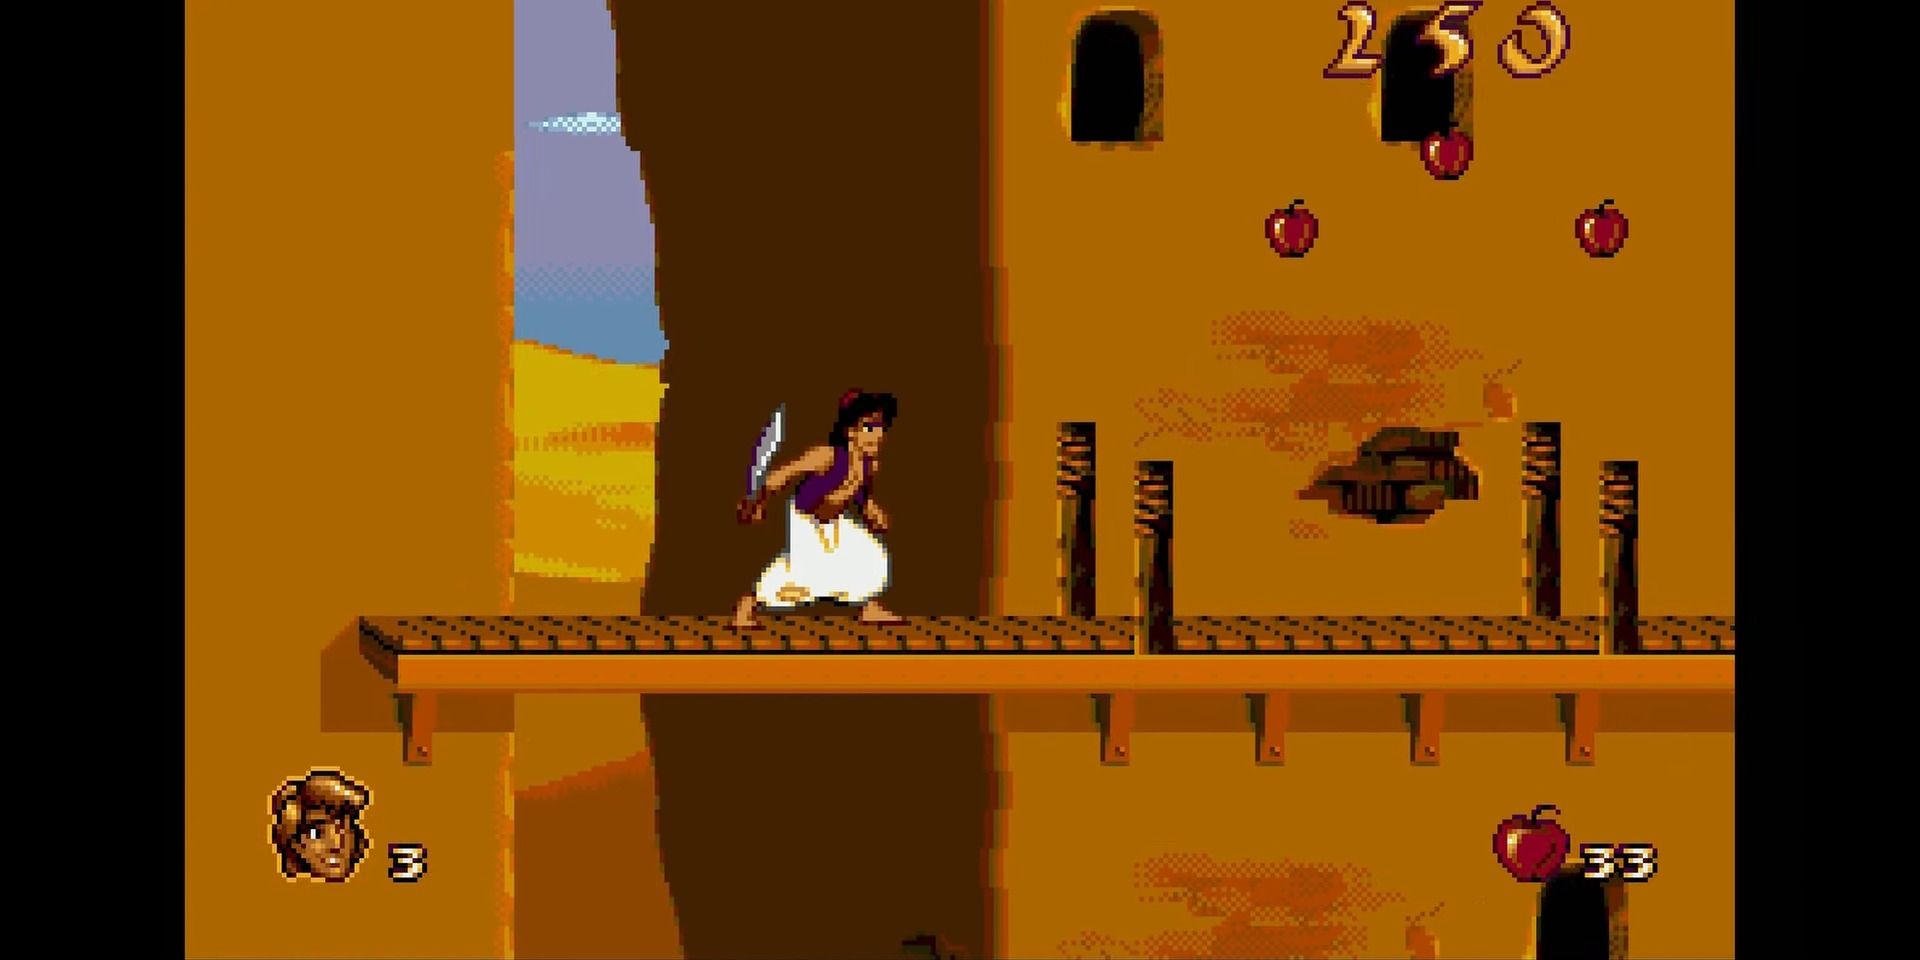 aladdin-games-to-play-at-home-uploadsno